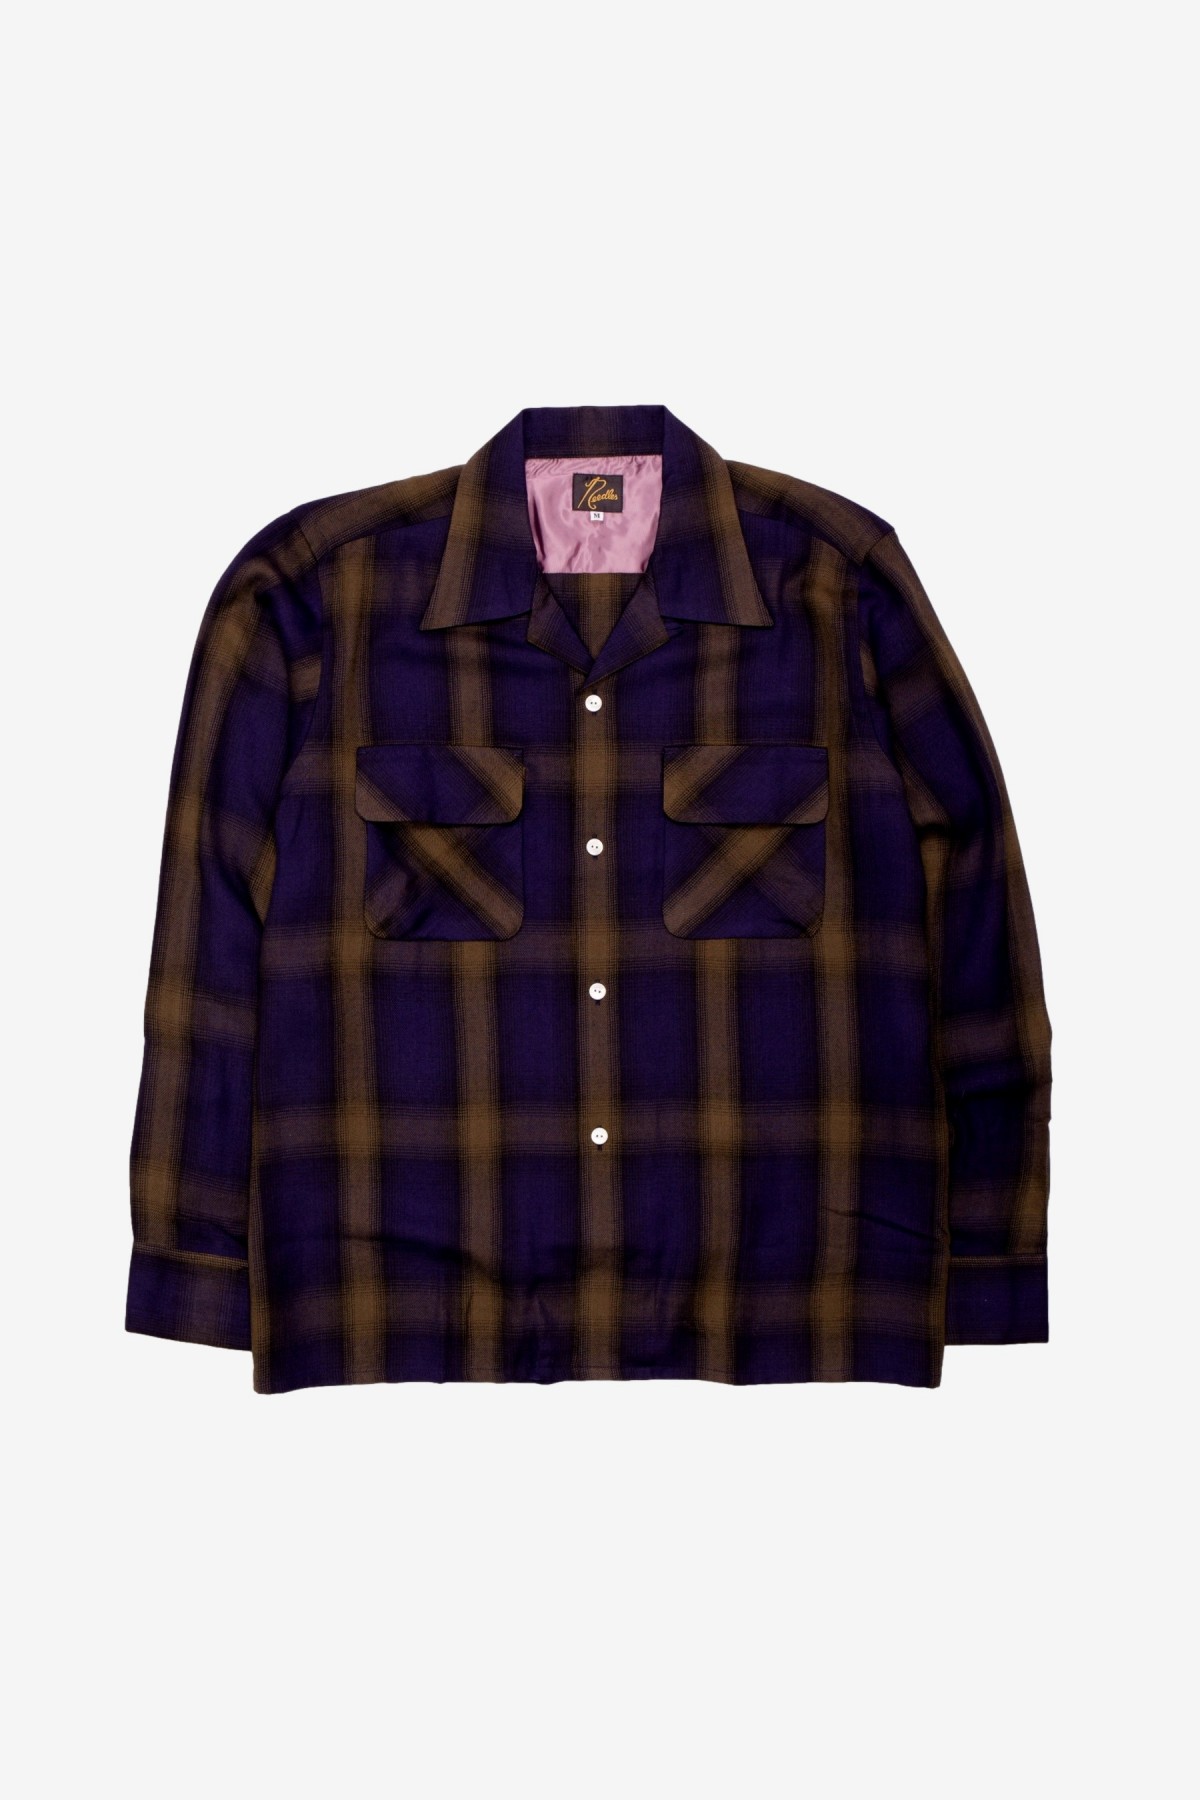 Needles Classic Shirt in Olive